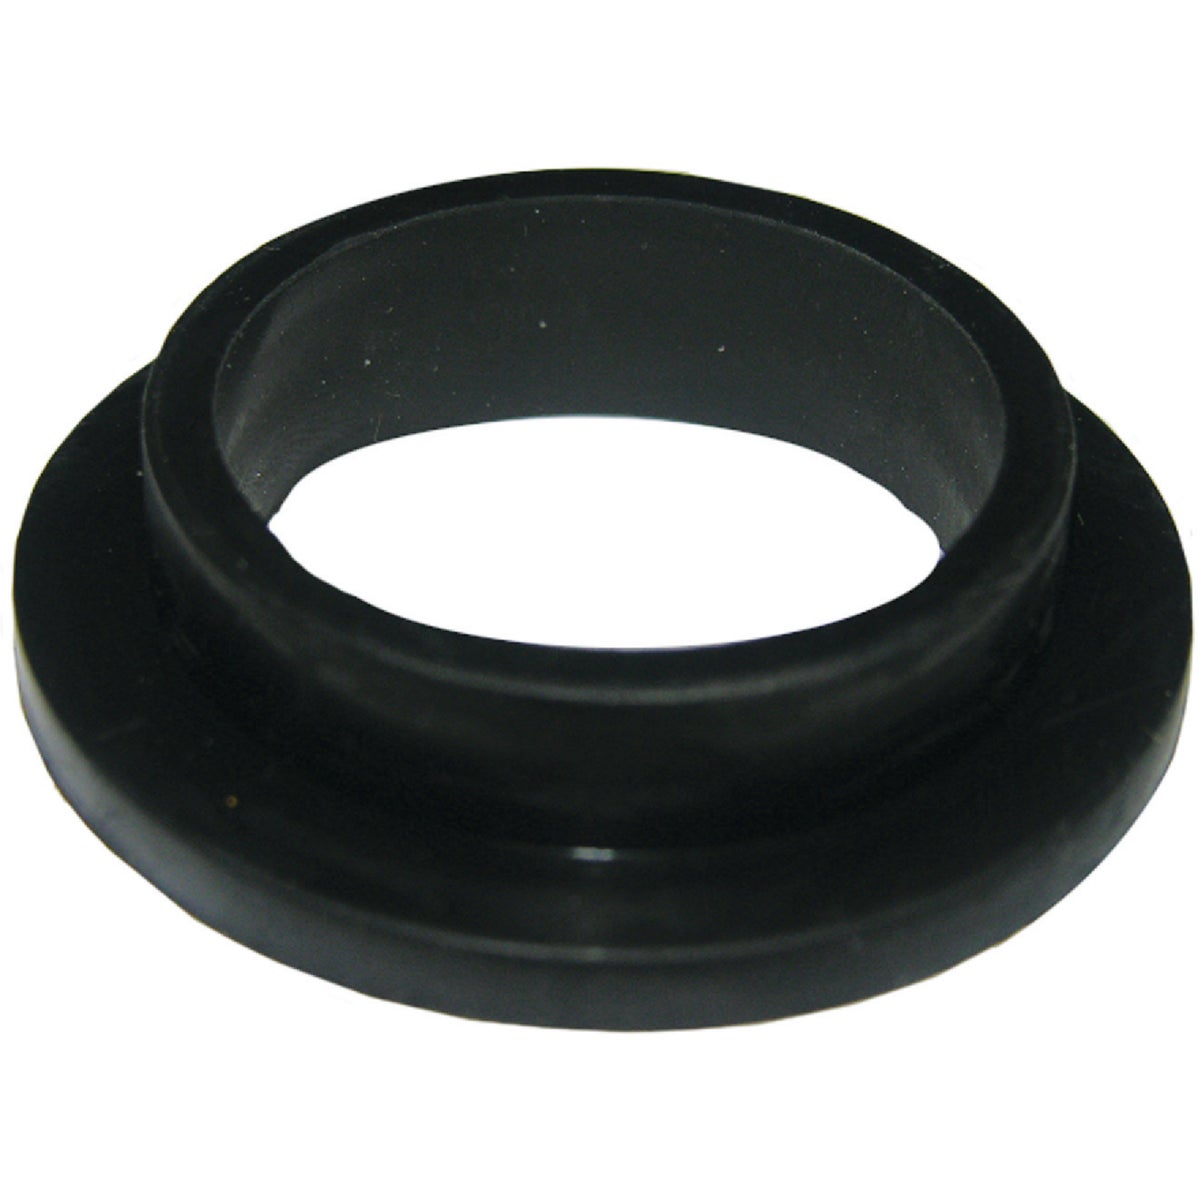 Lasco 1-1/4 In. Black Rubber Toilet Spud Flanged Washer 